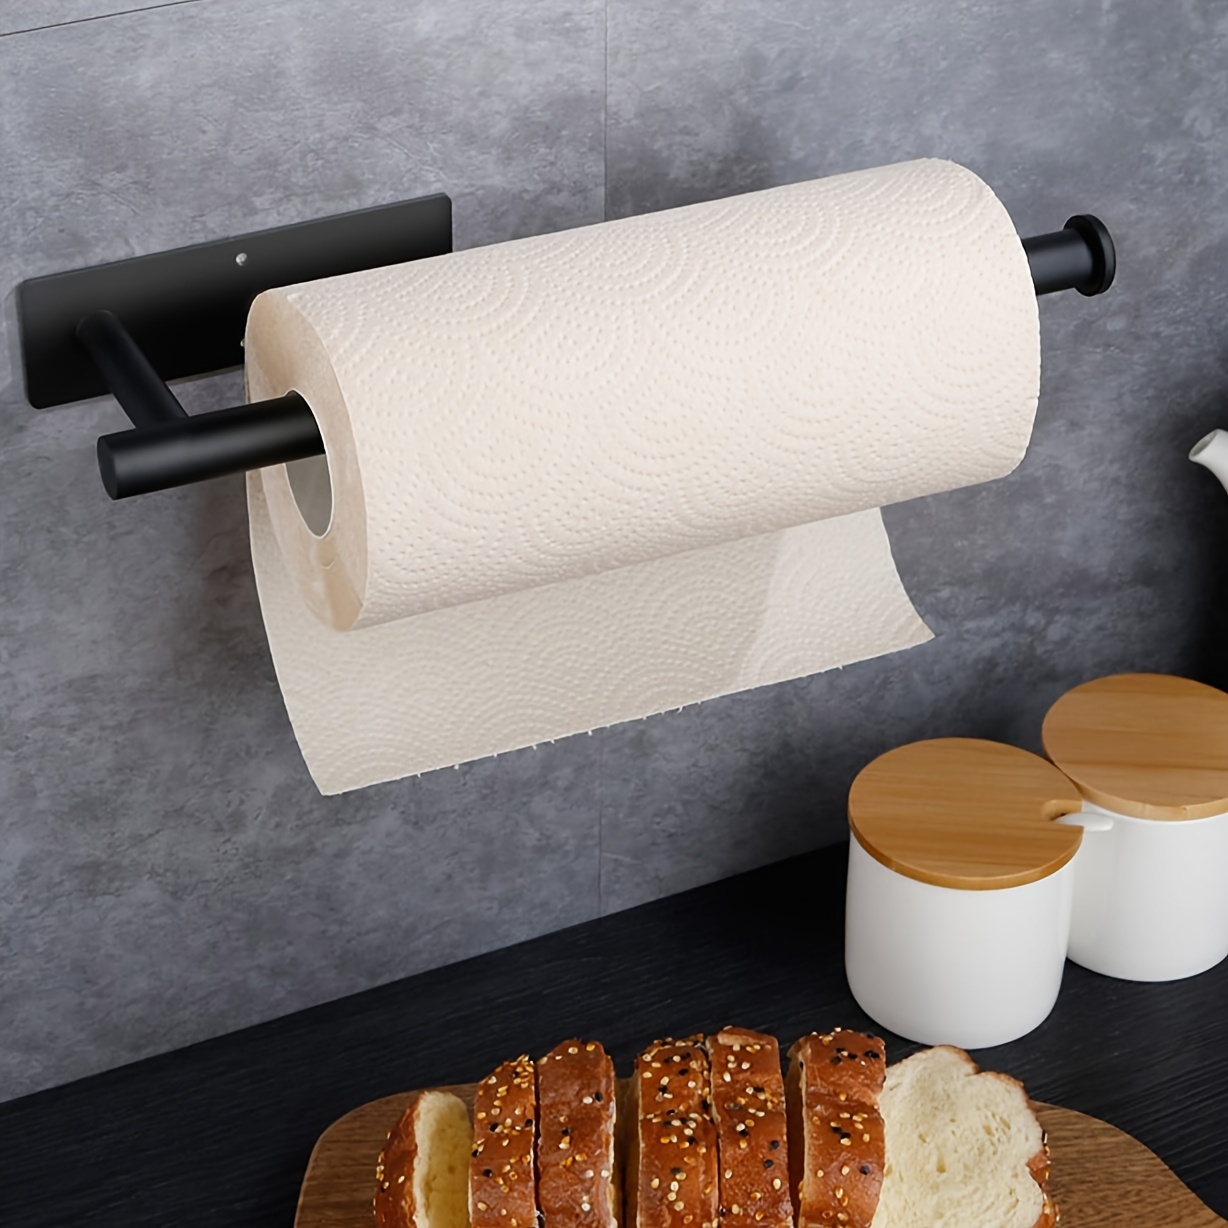 Black Paper Towel Holder Wall Mount - under Cabinet Self Adhesive